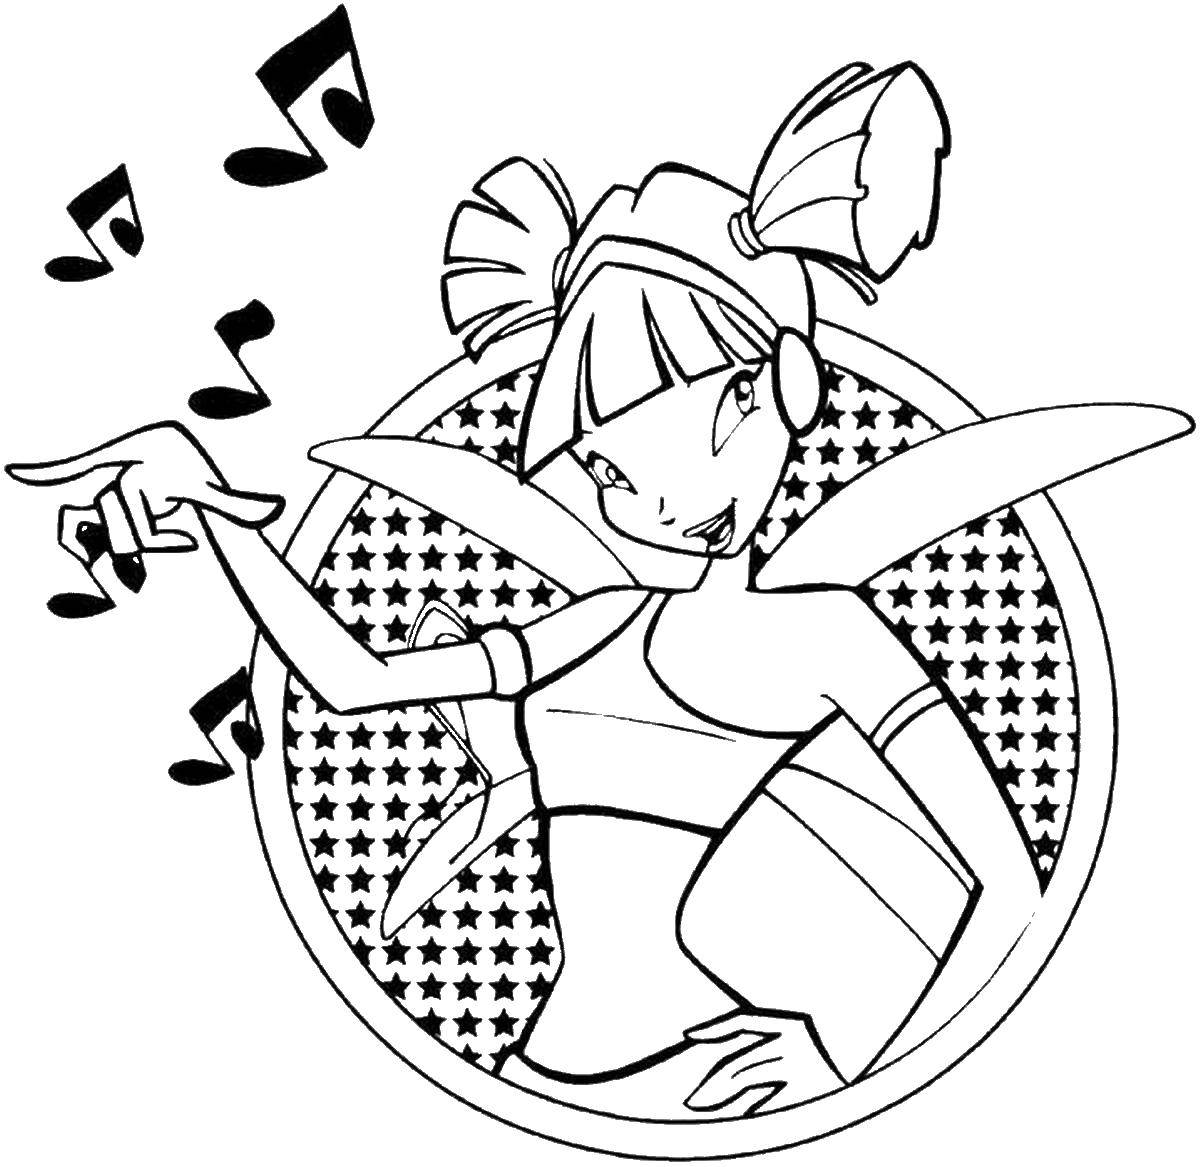 Coloring Muse in headphones listens to music. Category Winx. Tags:  Character cartoon, Winx.